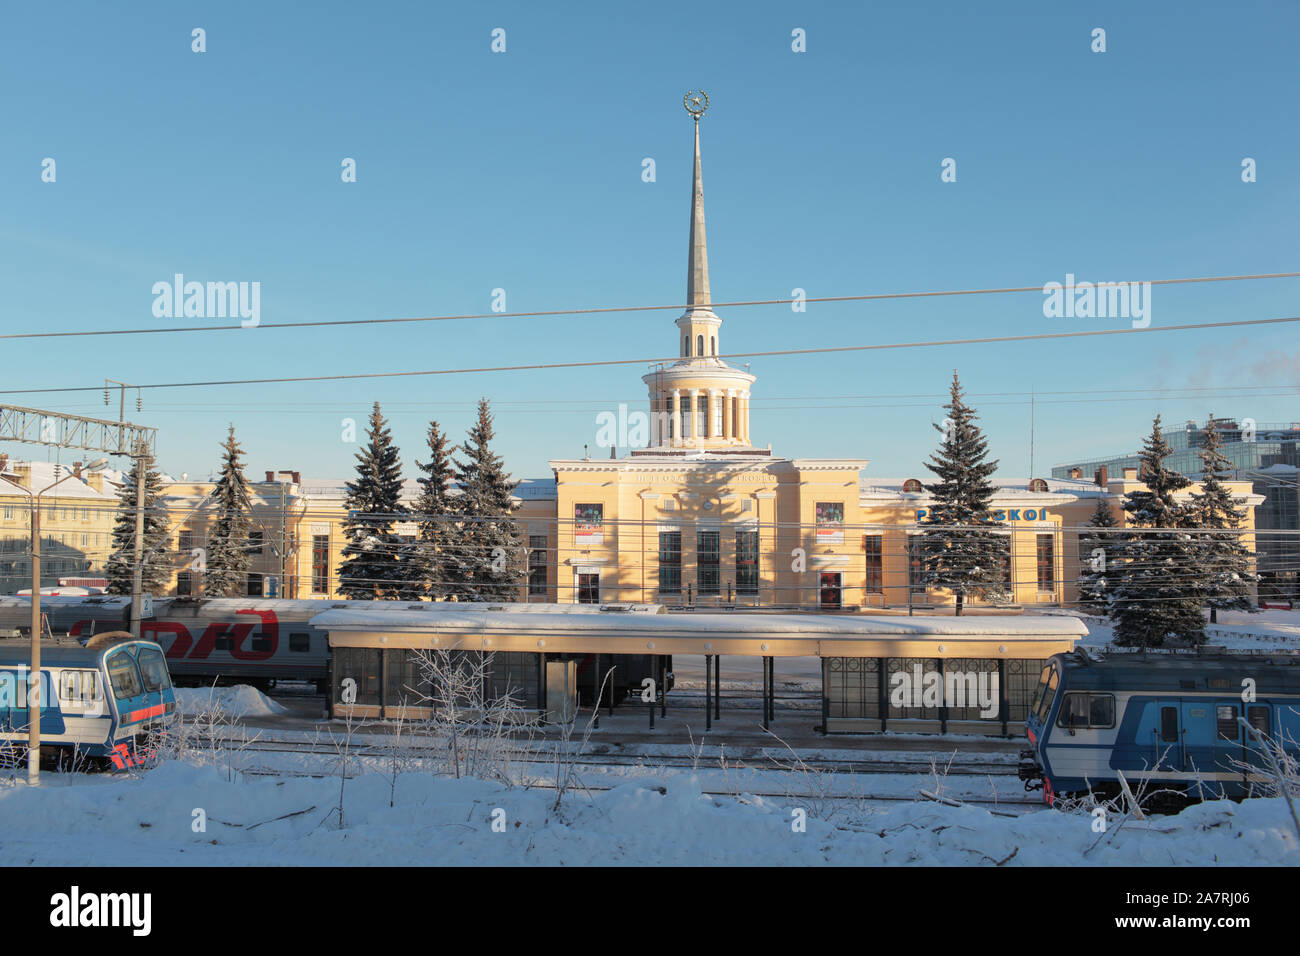 Petrozavodsk, Russia - January 18, 2013: Commuter trains on the railway station of Petrozavodsk, Karelia, Russia on January 18, 2013. The building was Stock Photo